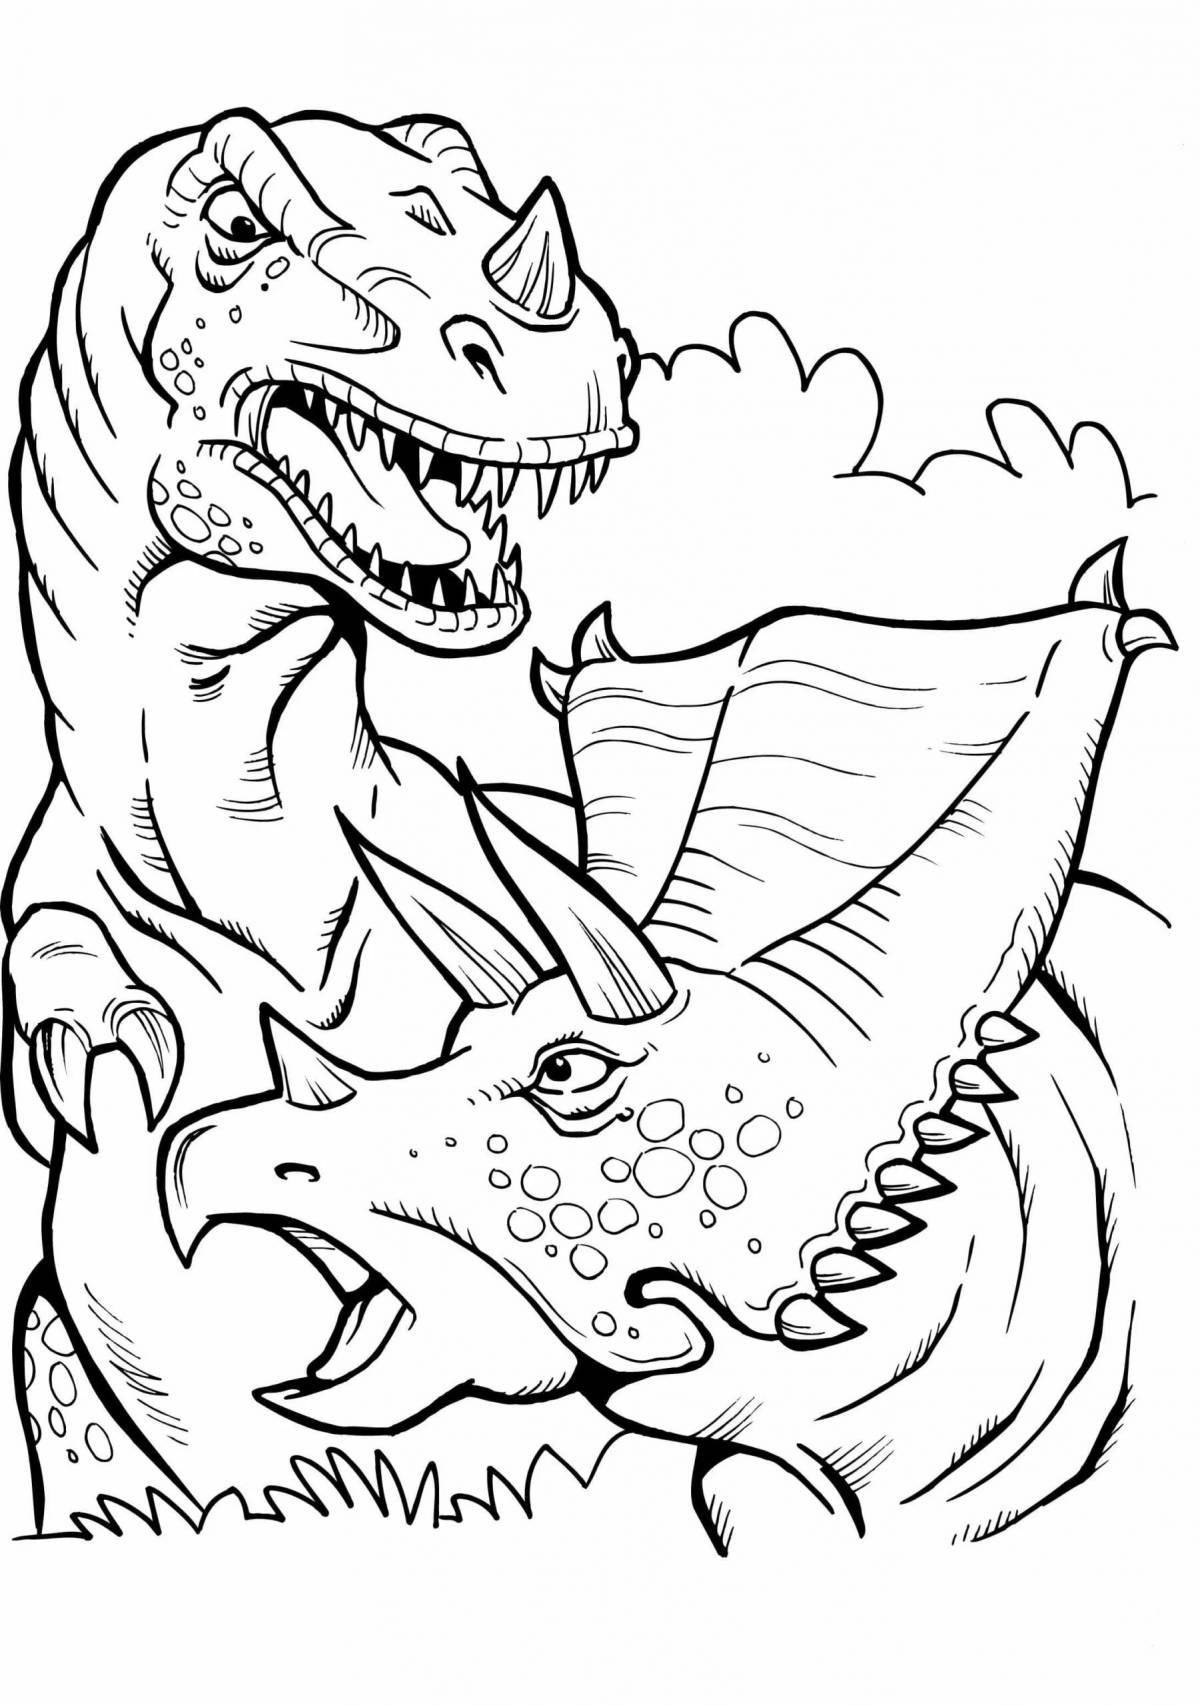 Coloring page energetic t-rex